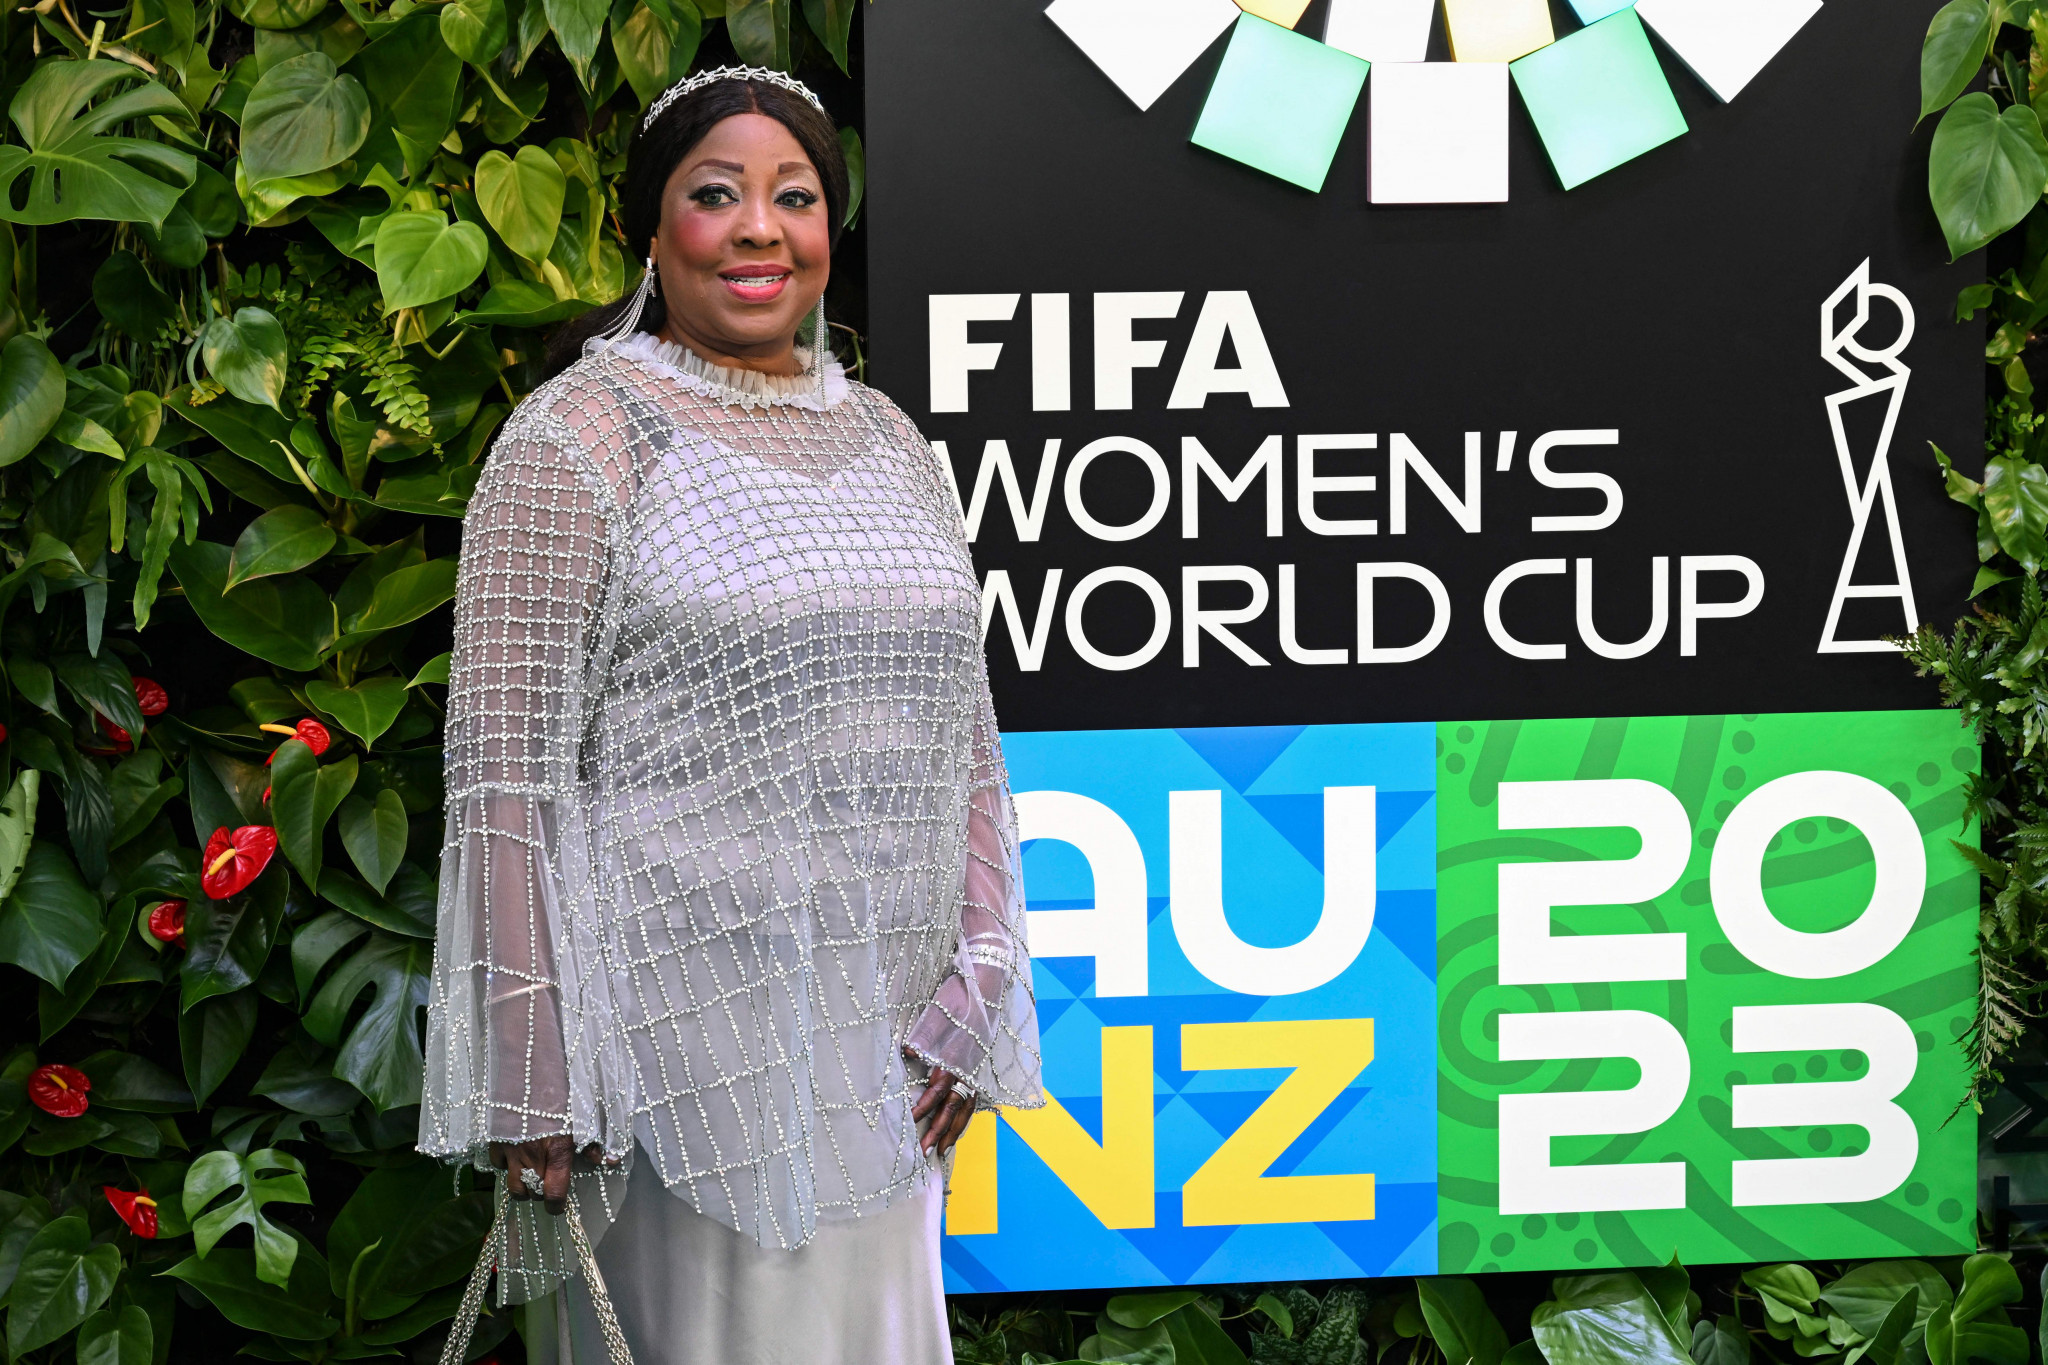 FIFA secretary general Fatma Samoura claims that Cisco will ensure the delivery of a 